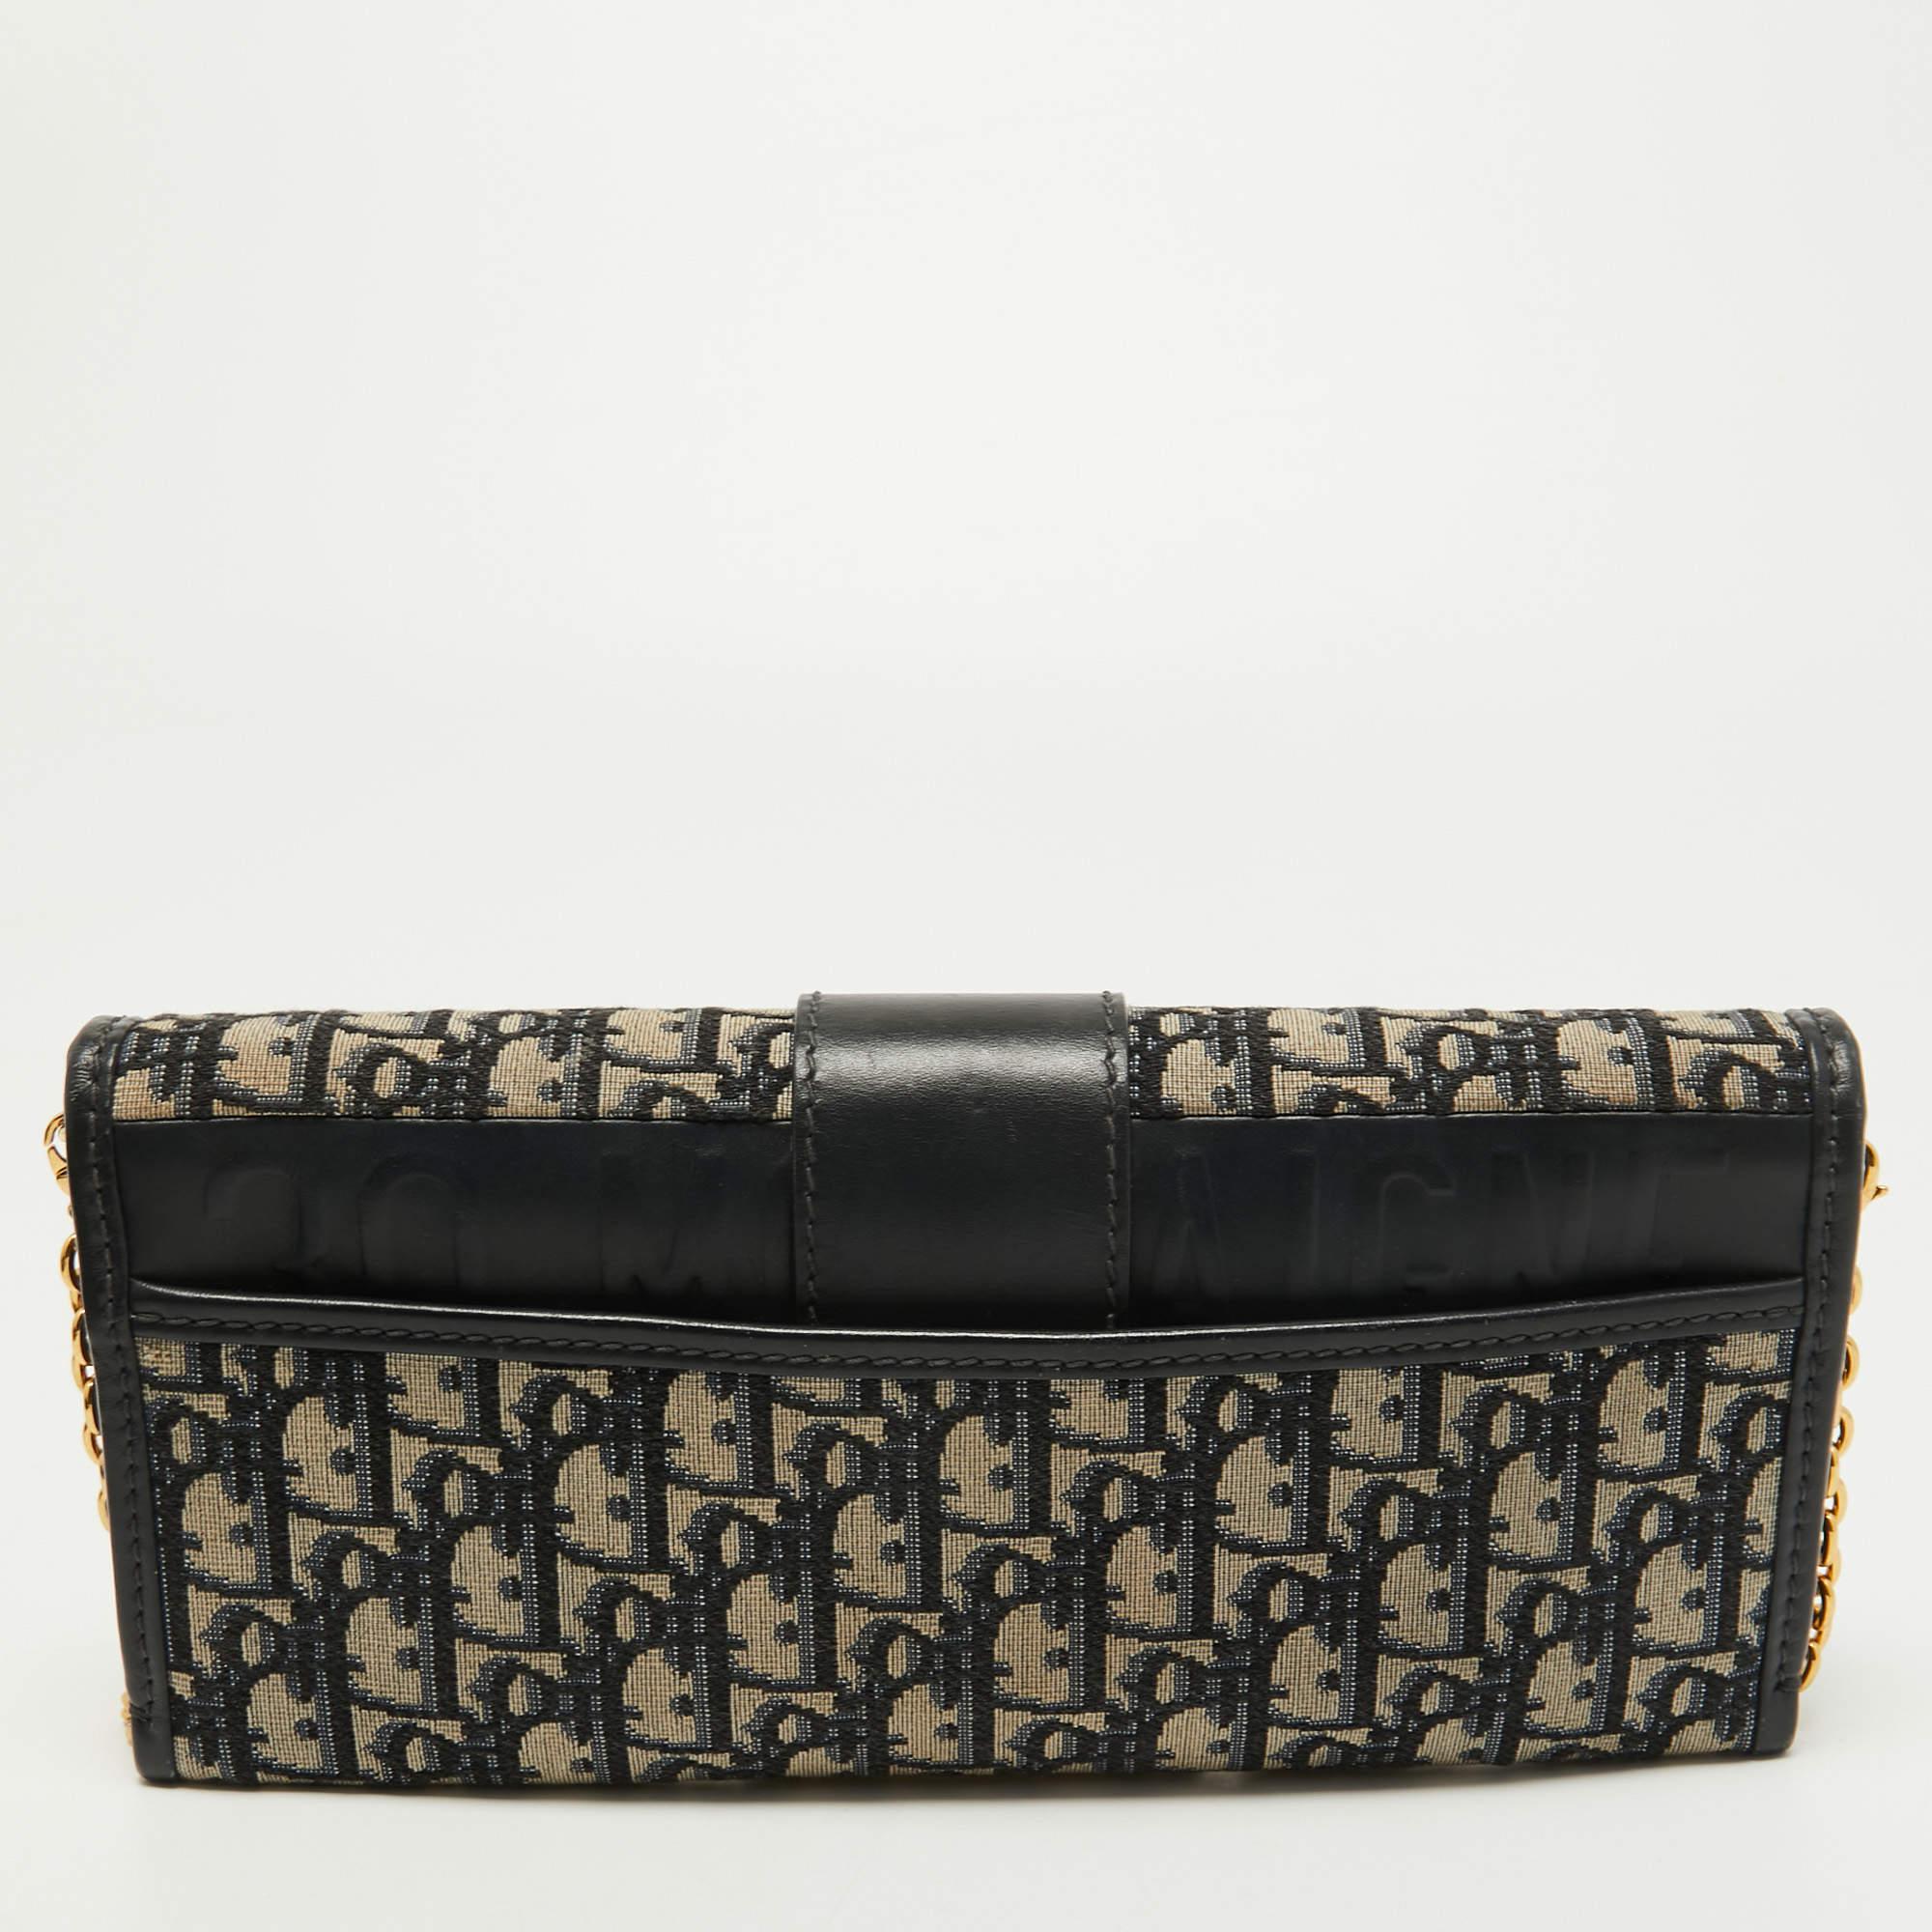 Crafted from quality materials, your wardrobe is missing out on this beautifully made designer clutch. Look your fashionable best in any outfit with this stylish clutch that promises to elevate your ensemble.

Includes: Detachable Chain